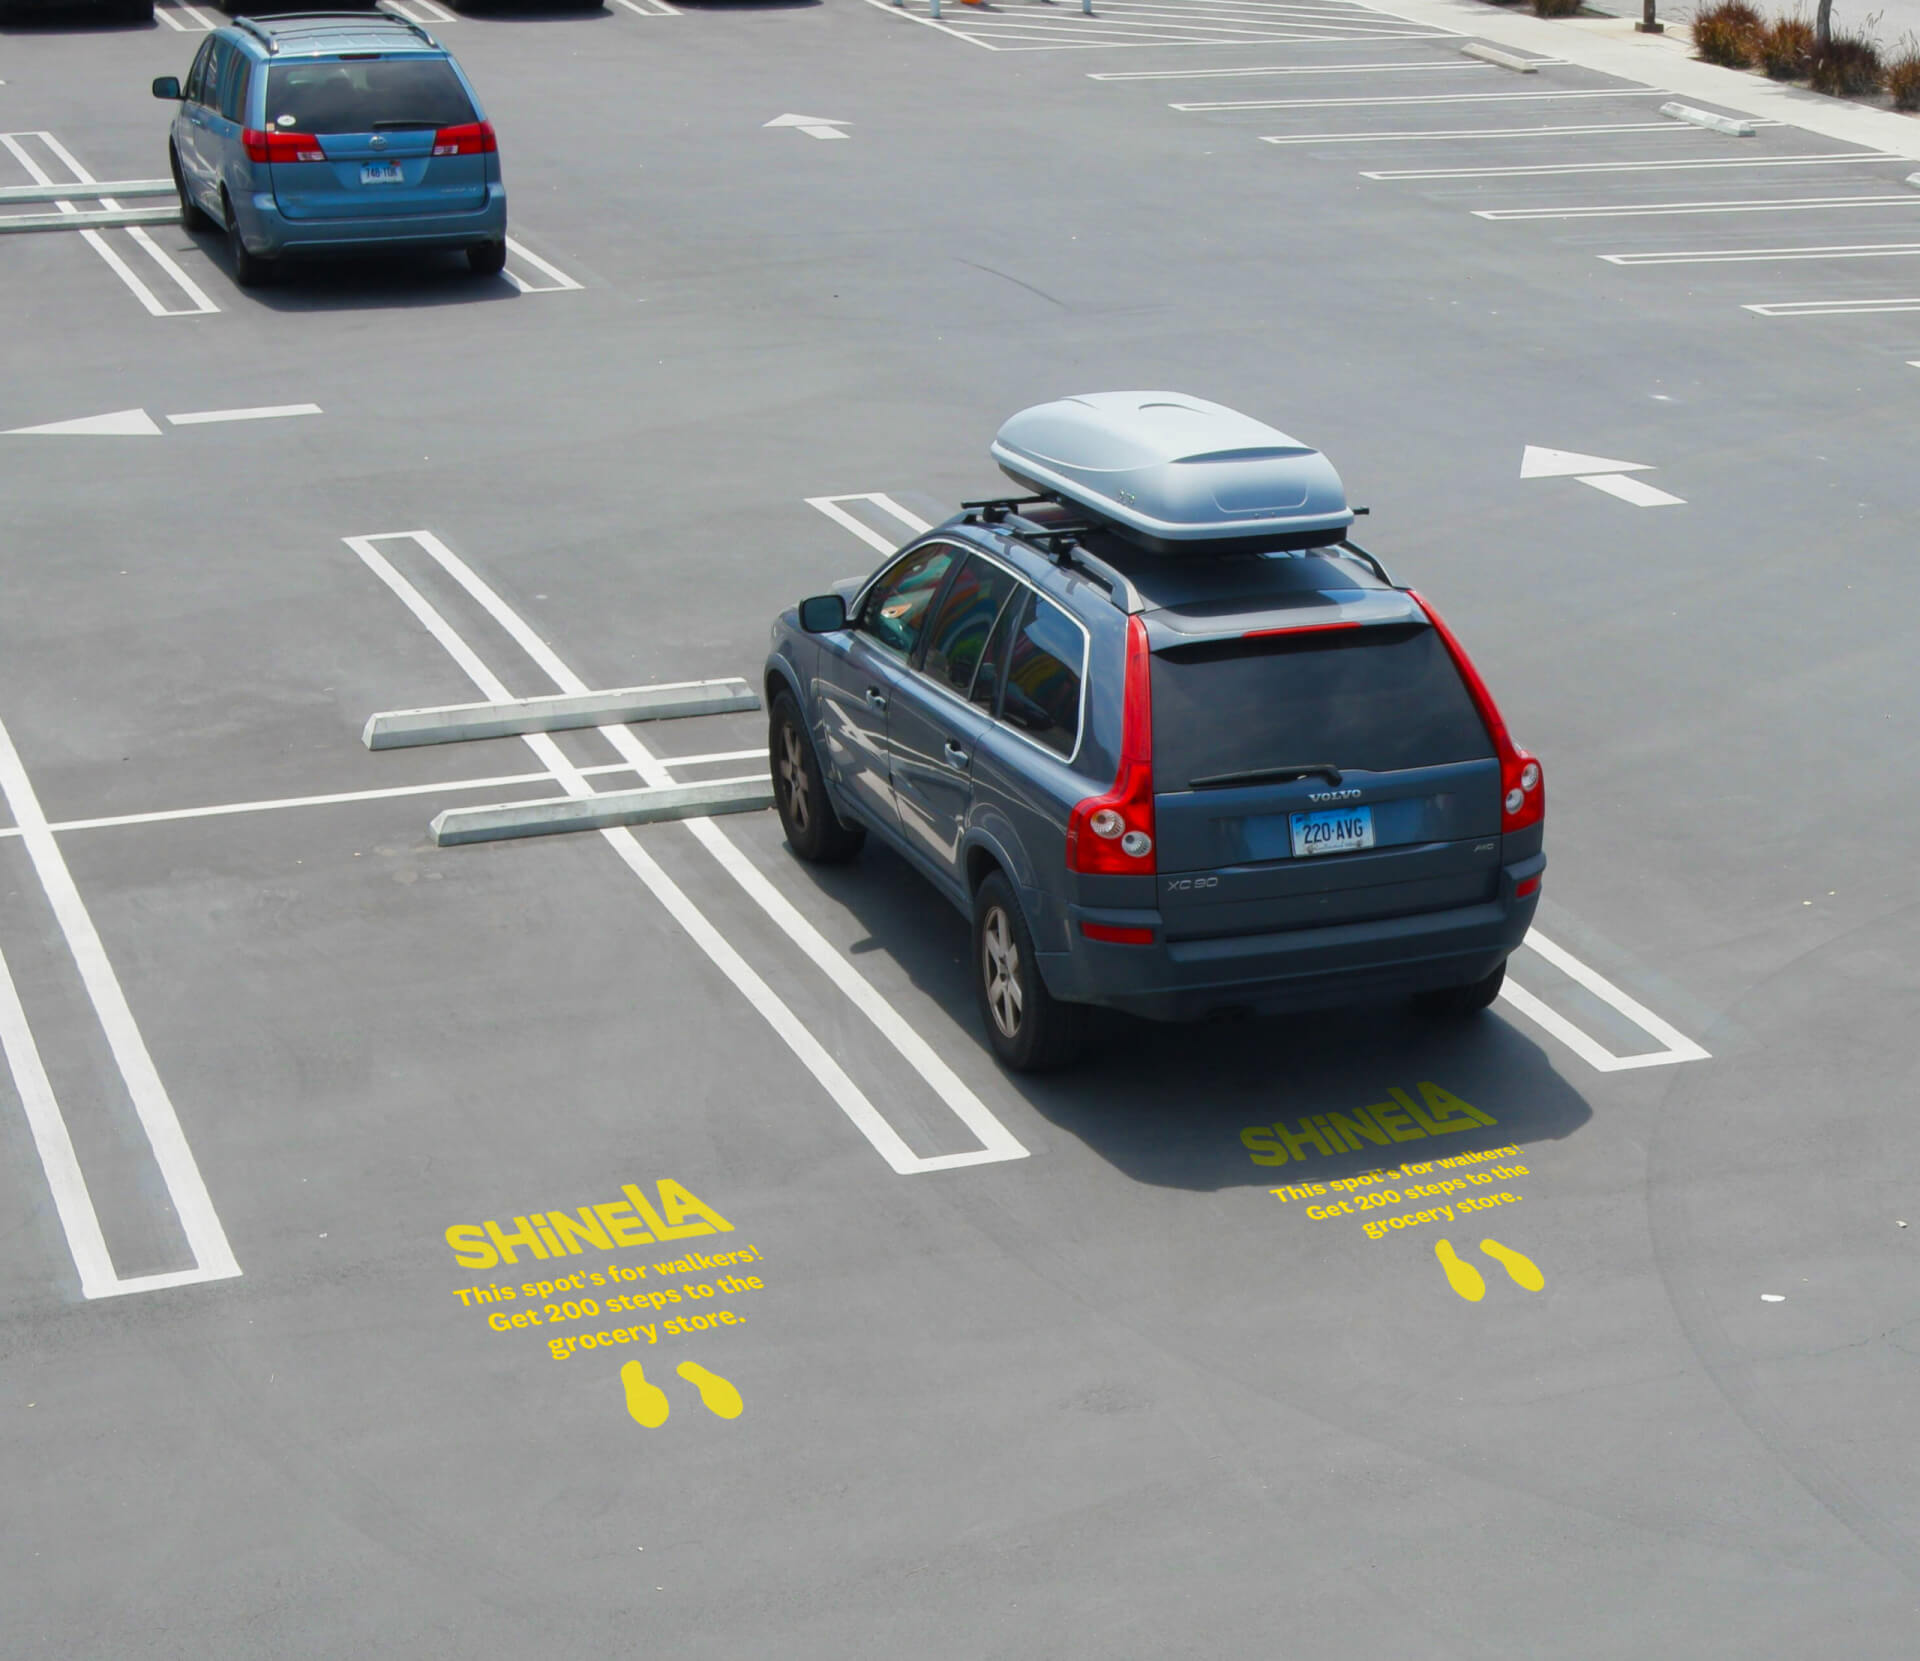 Arial photo of a car in a spot with a call to action to park there painted on the road to encourage more steps in the parking lot., the stairs have a mockup encouraging people to stay fit with call to action parking space painted.